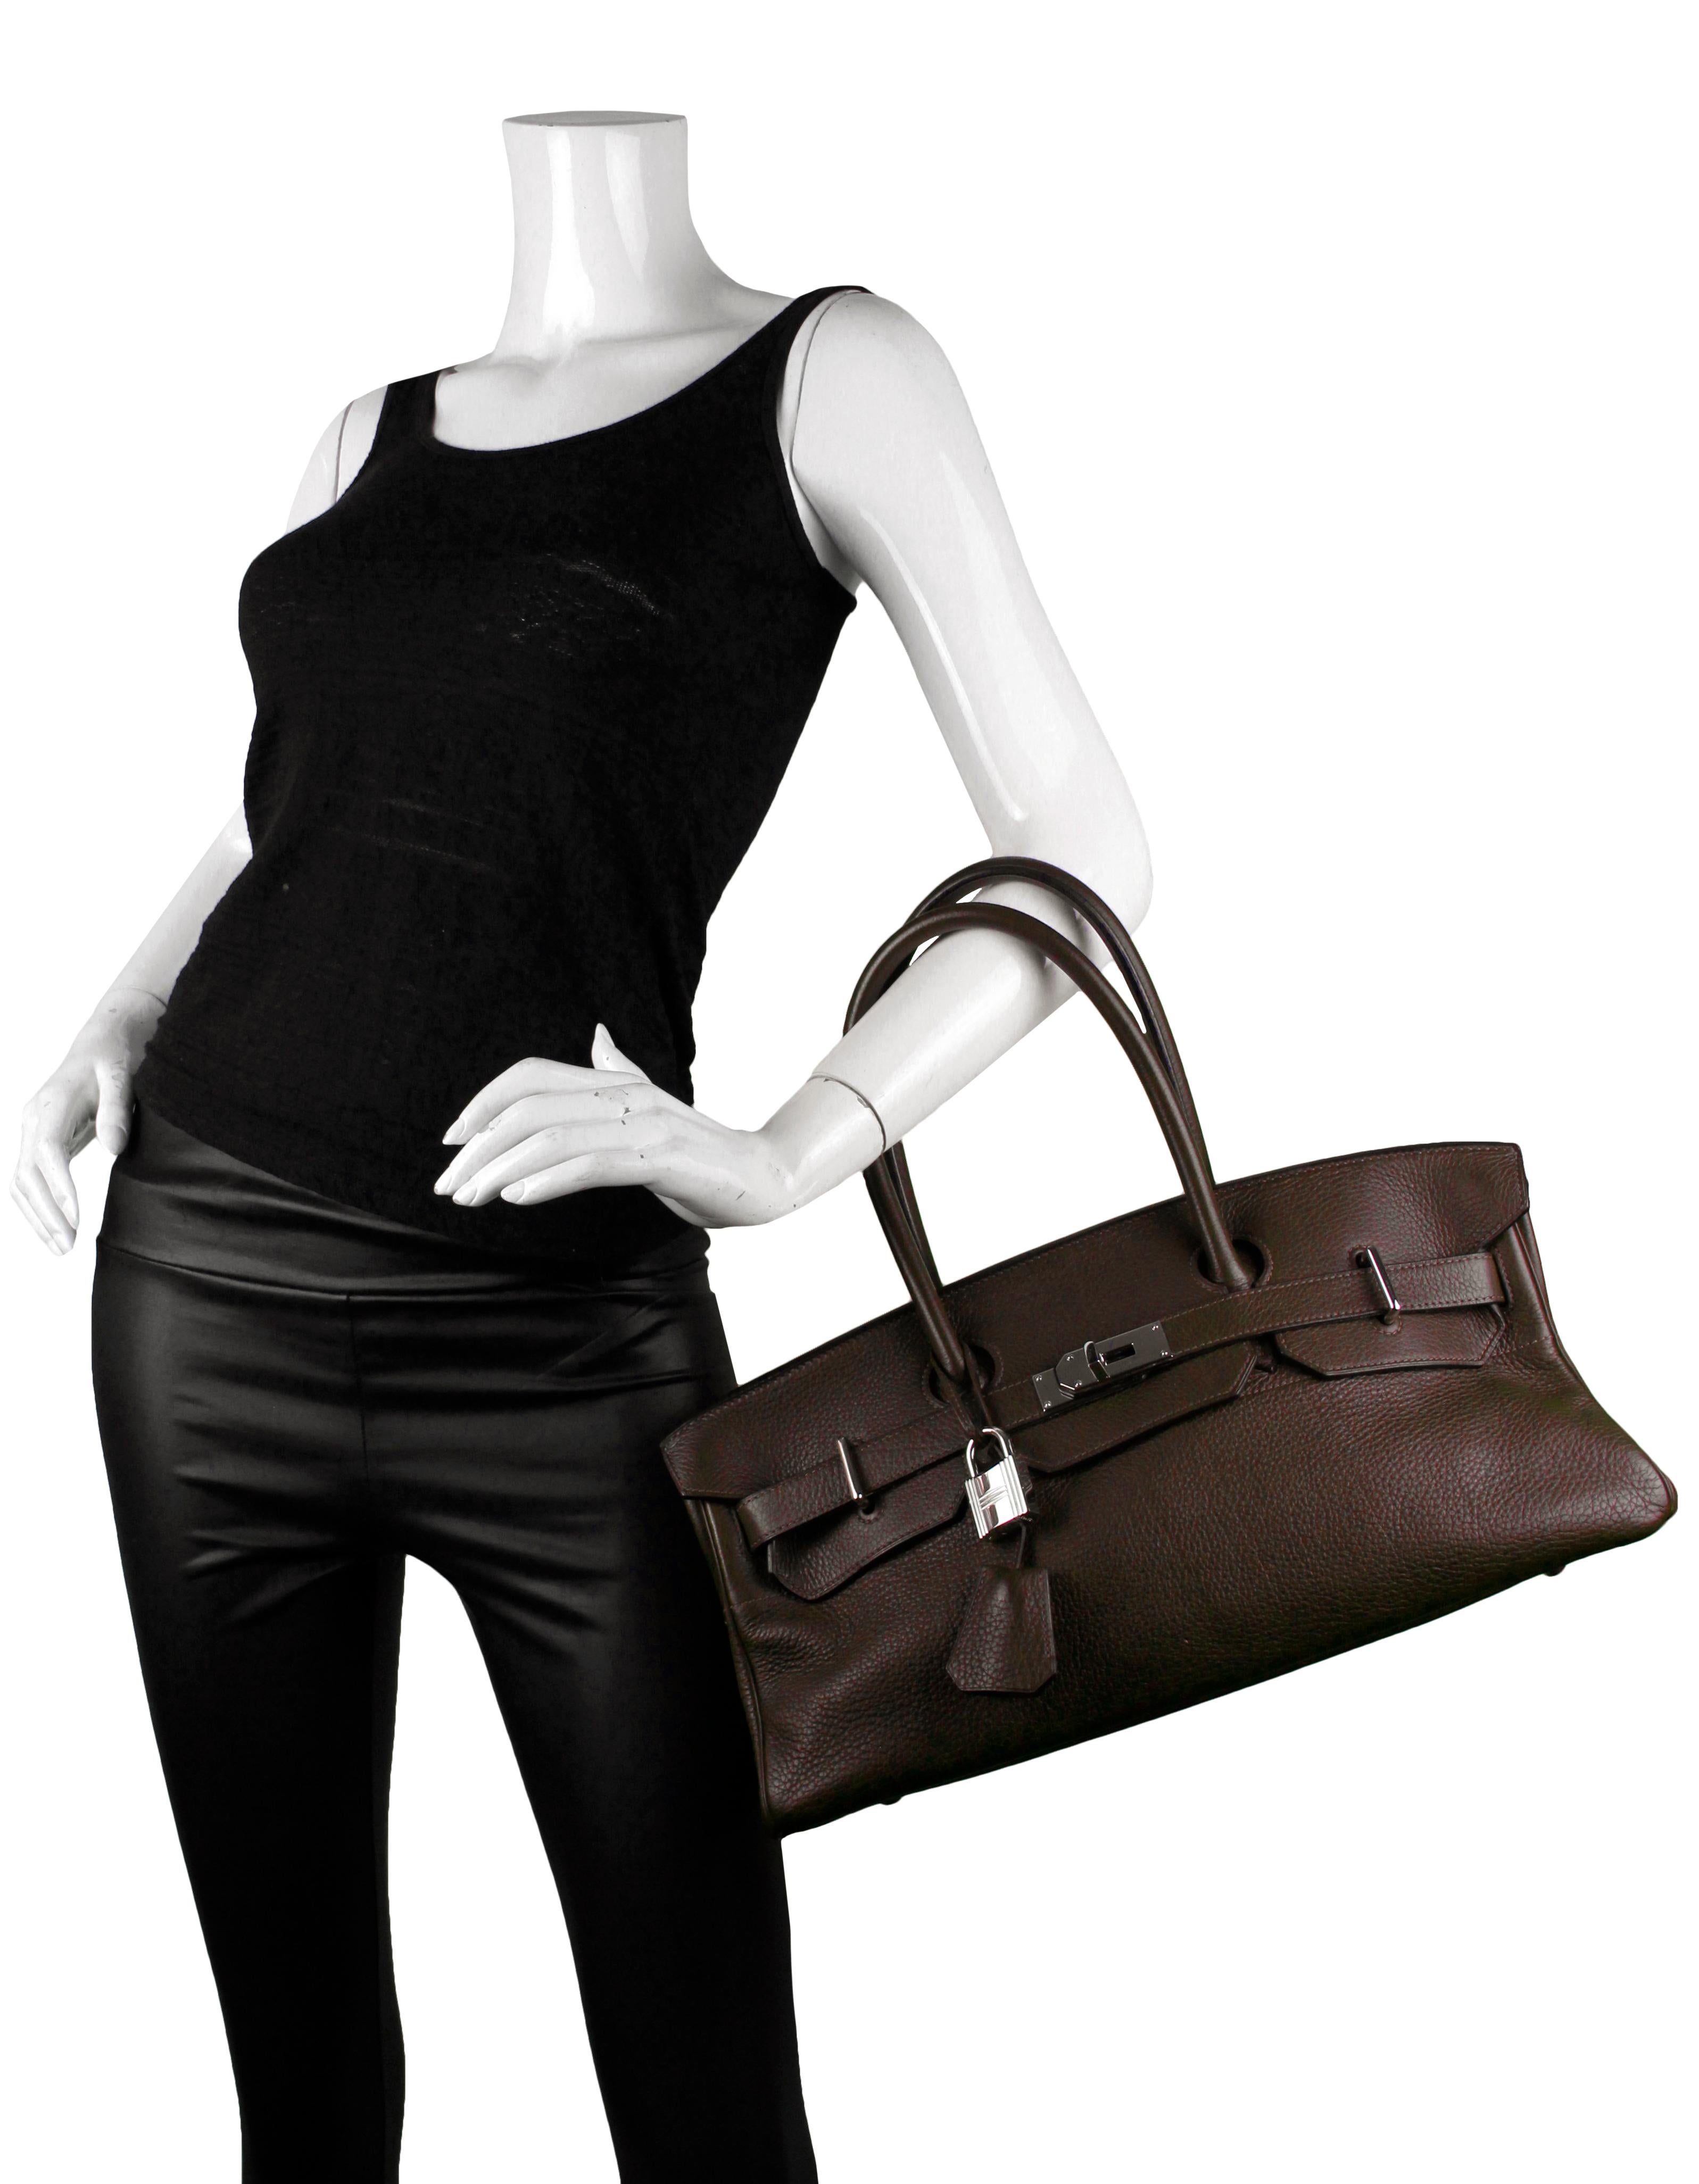 Hermes Brown Taurillon Clemence JPG Shoulder Birkin 42

Made In: France
Year of Production: 2007
Color: Brown
Hardware: Silvertone palladium
Materials: Taurillon clemence leather
Lining: Chevre leather
Closure/Opening: Double arm strap with twist